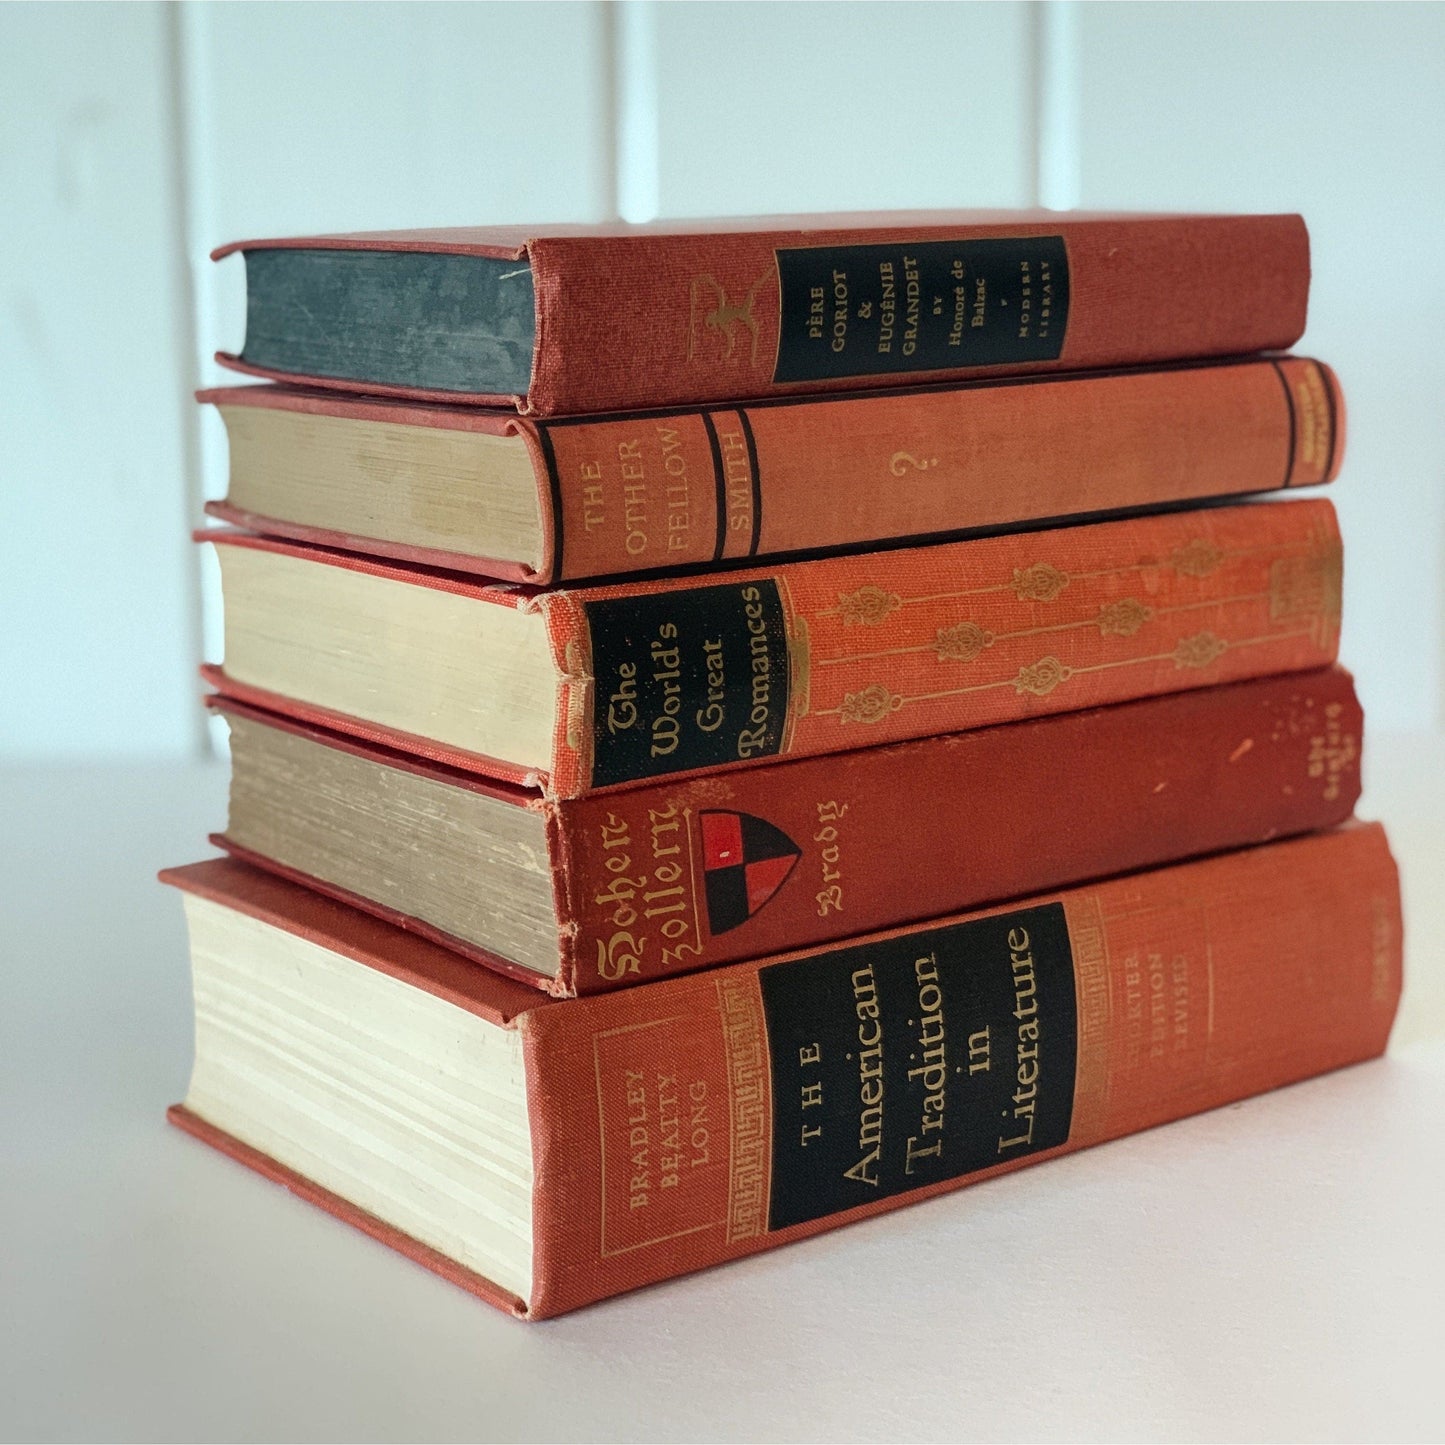 Terra Cotta and Rust Red Vintage Books for Decor, Bookshelf Decor, Books By Color